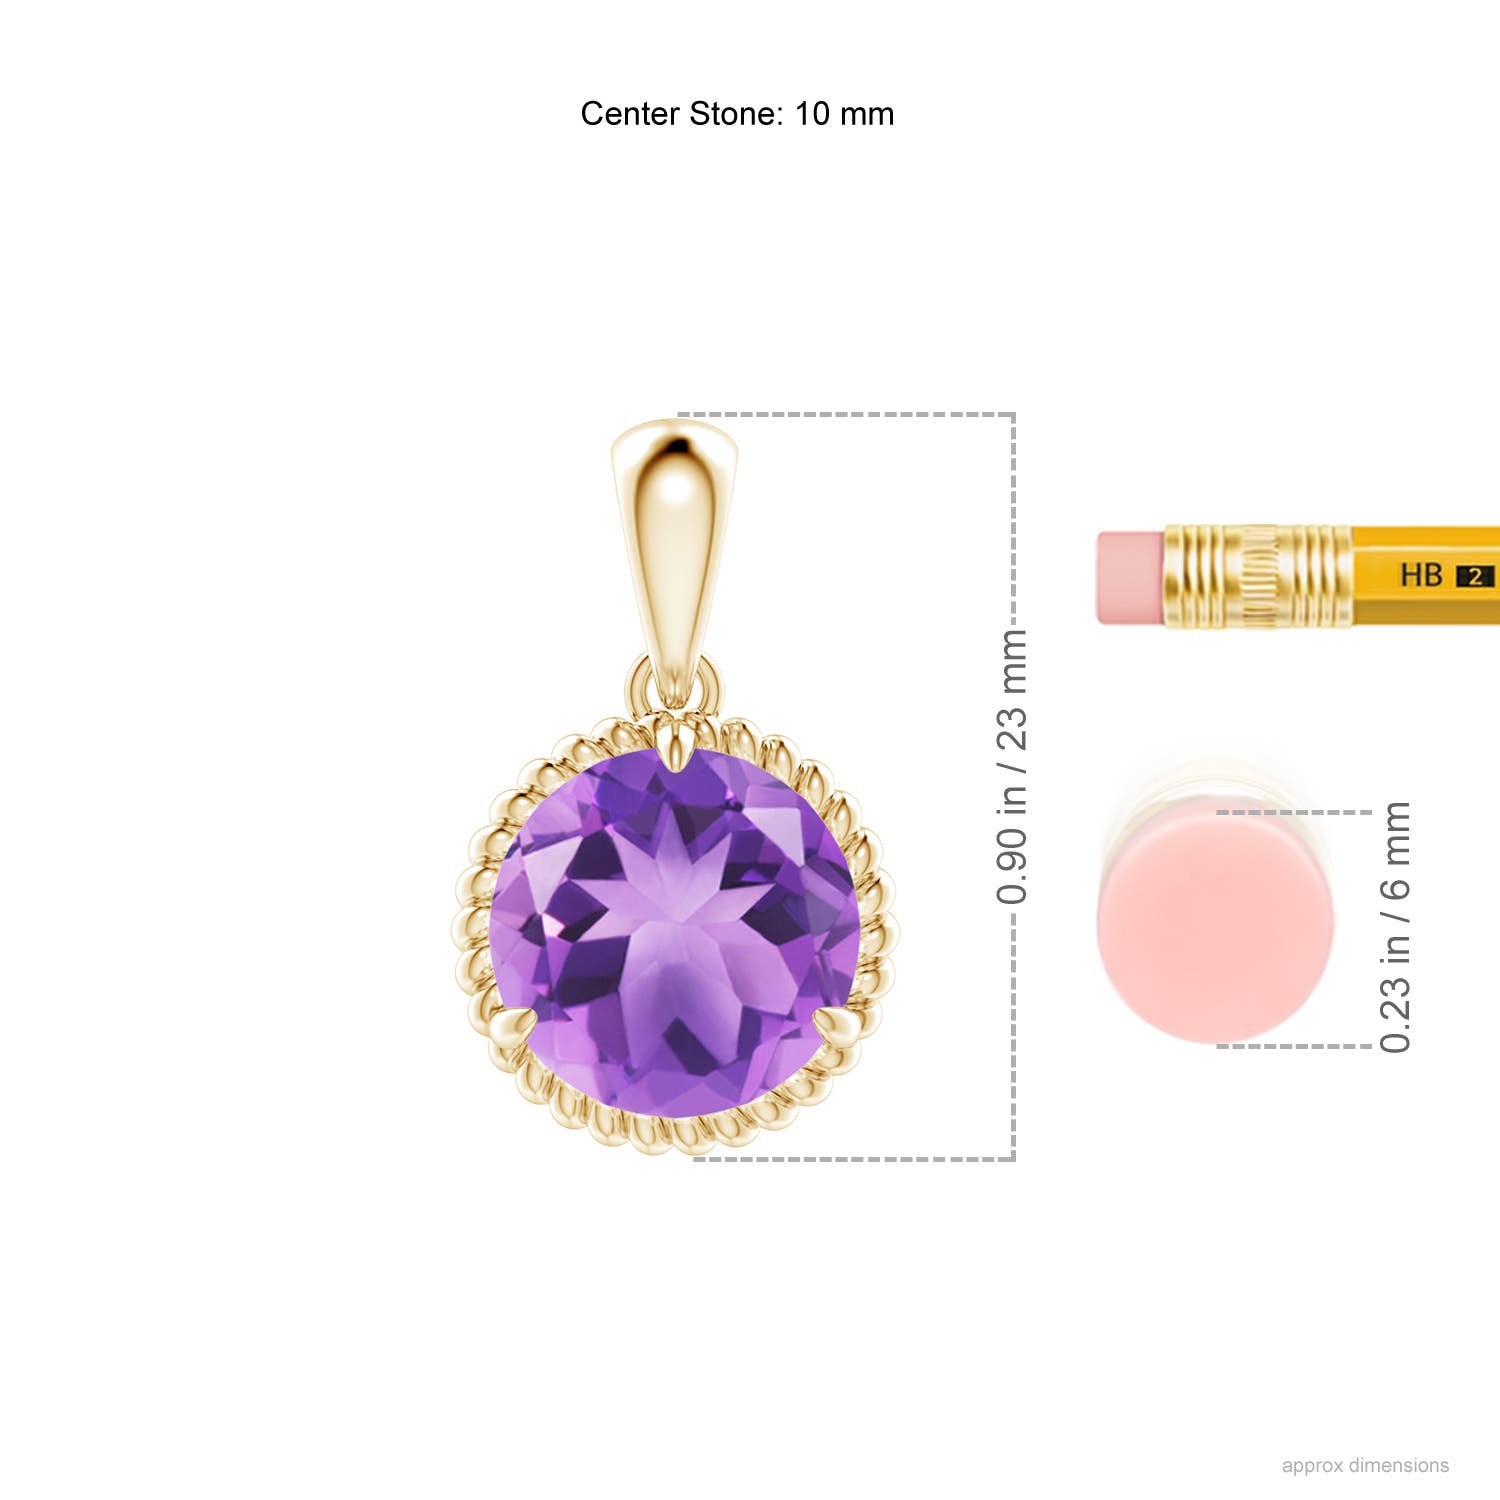 A - Amethyst / 3.2 CT / 14 KT Yellow Gold